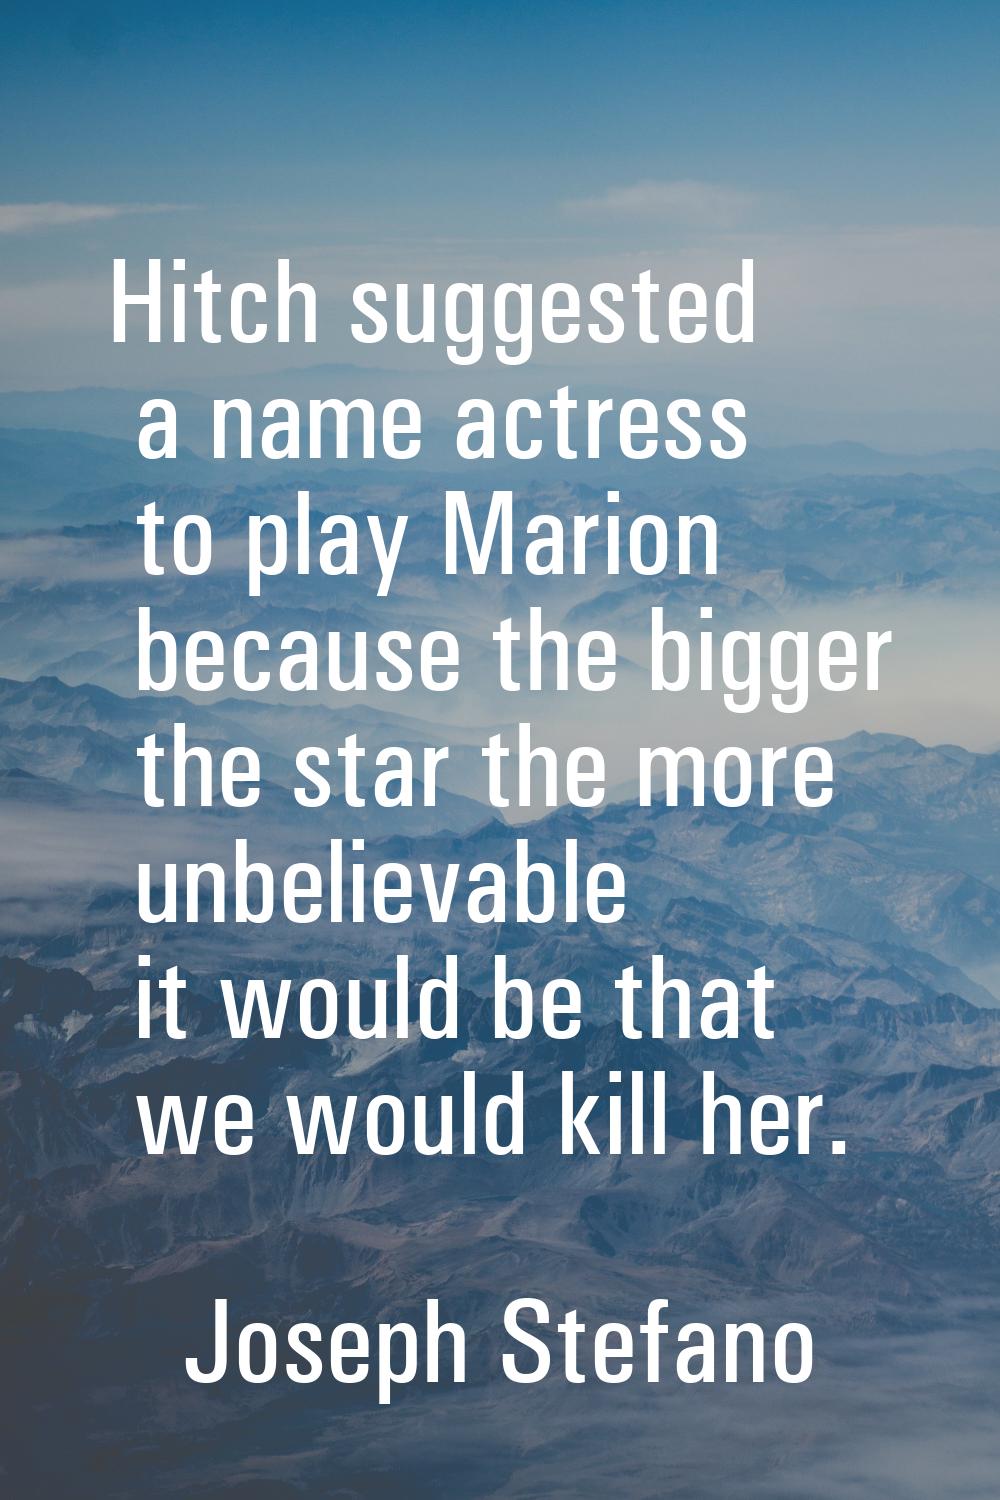 Hitch suggested a name actress to play Marion because the bigger the star the more unbelievable it 